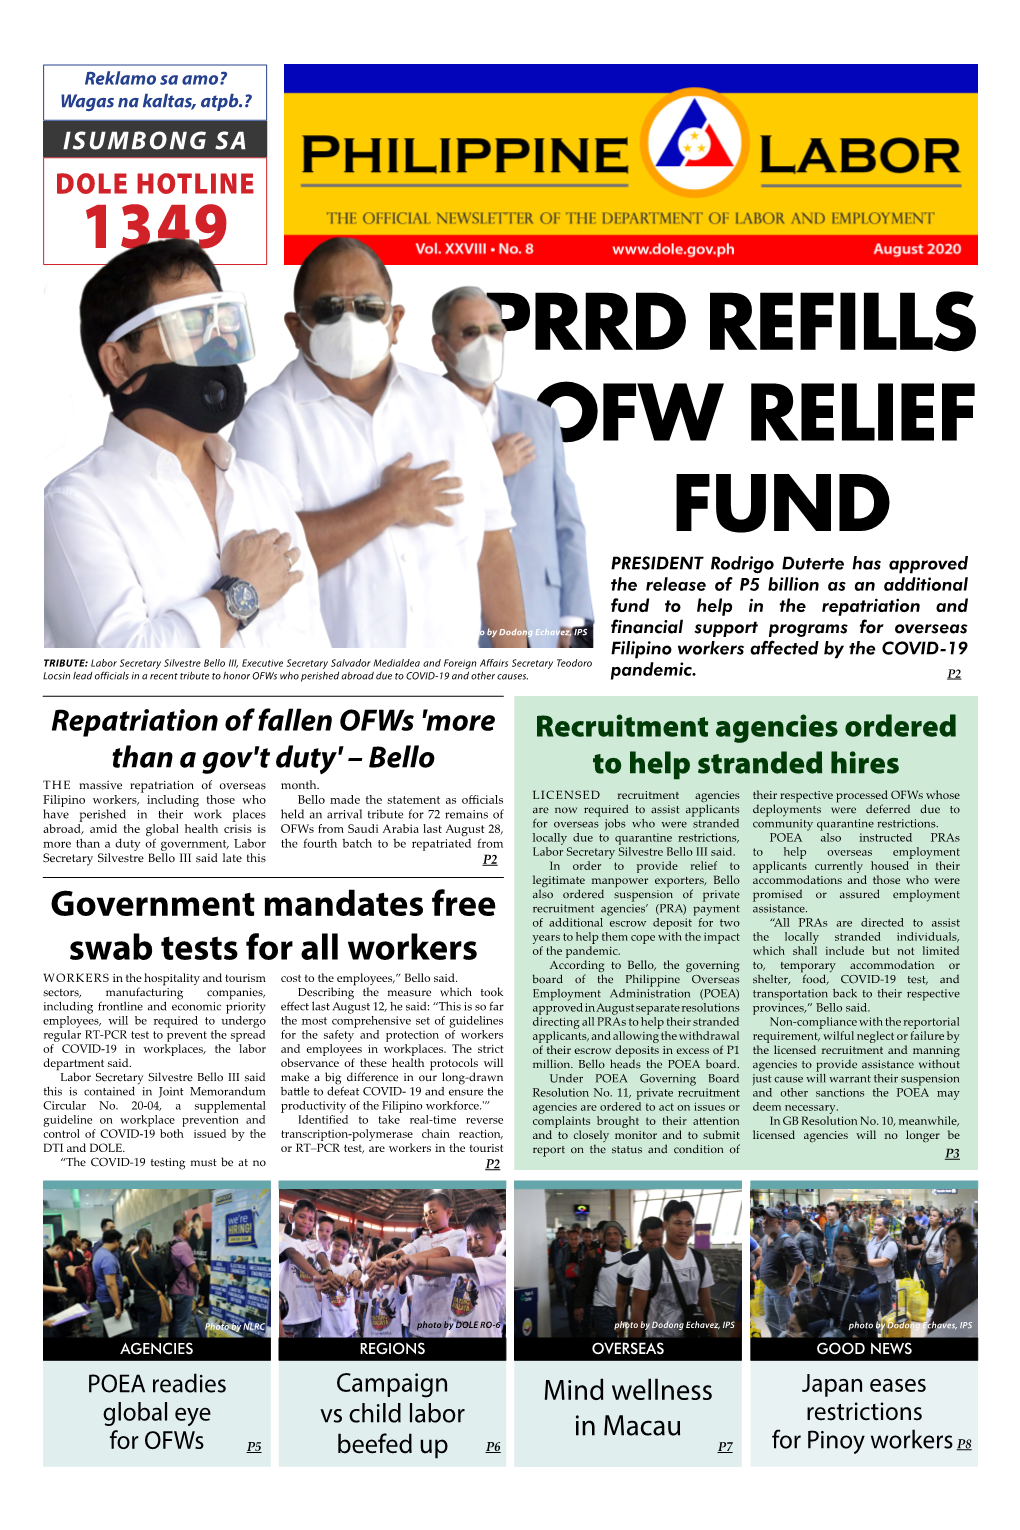 PRRD REFILLS OFW RELIEF FUND PRESIDENT Rodrigo Duterte Has Approved the Release of P5 Billion As an Additional Fund to Help in the Repatriation And